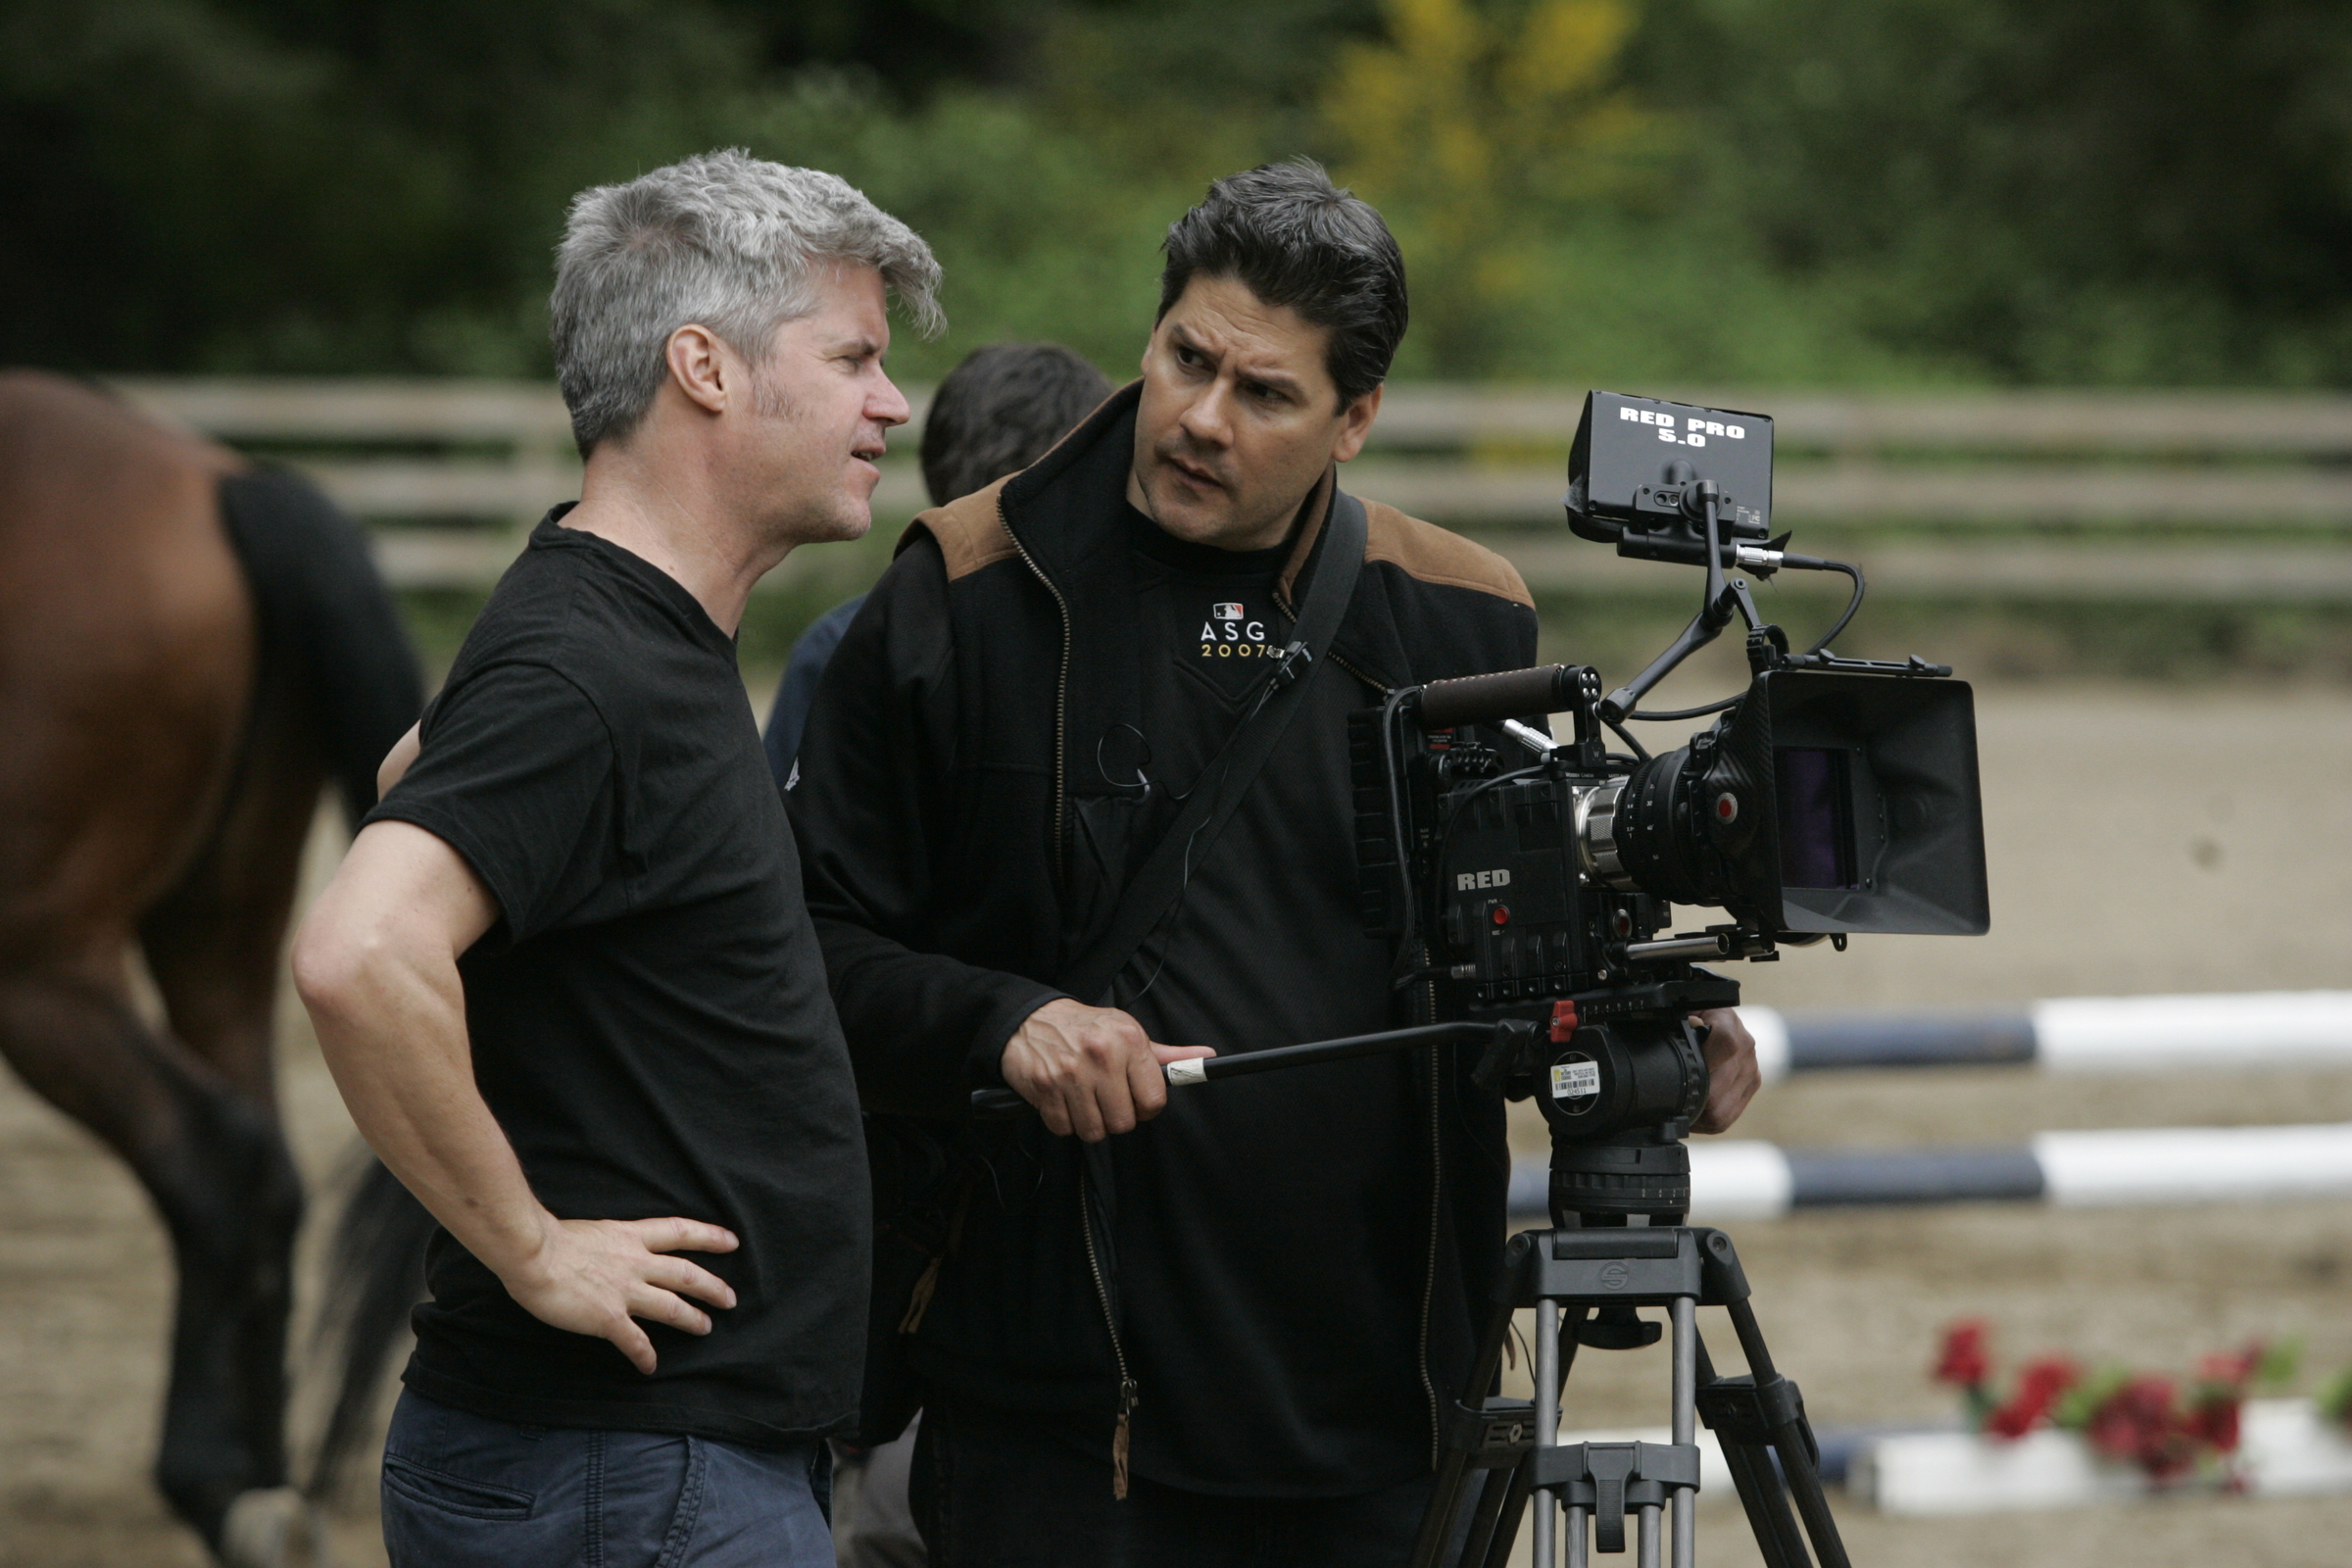 Director Scott A. Capestany (R) with Cinematographer Ryan Purcell (L) on the set of 